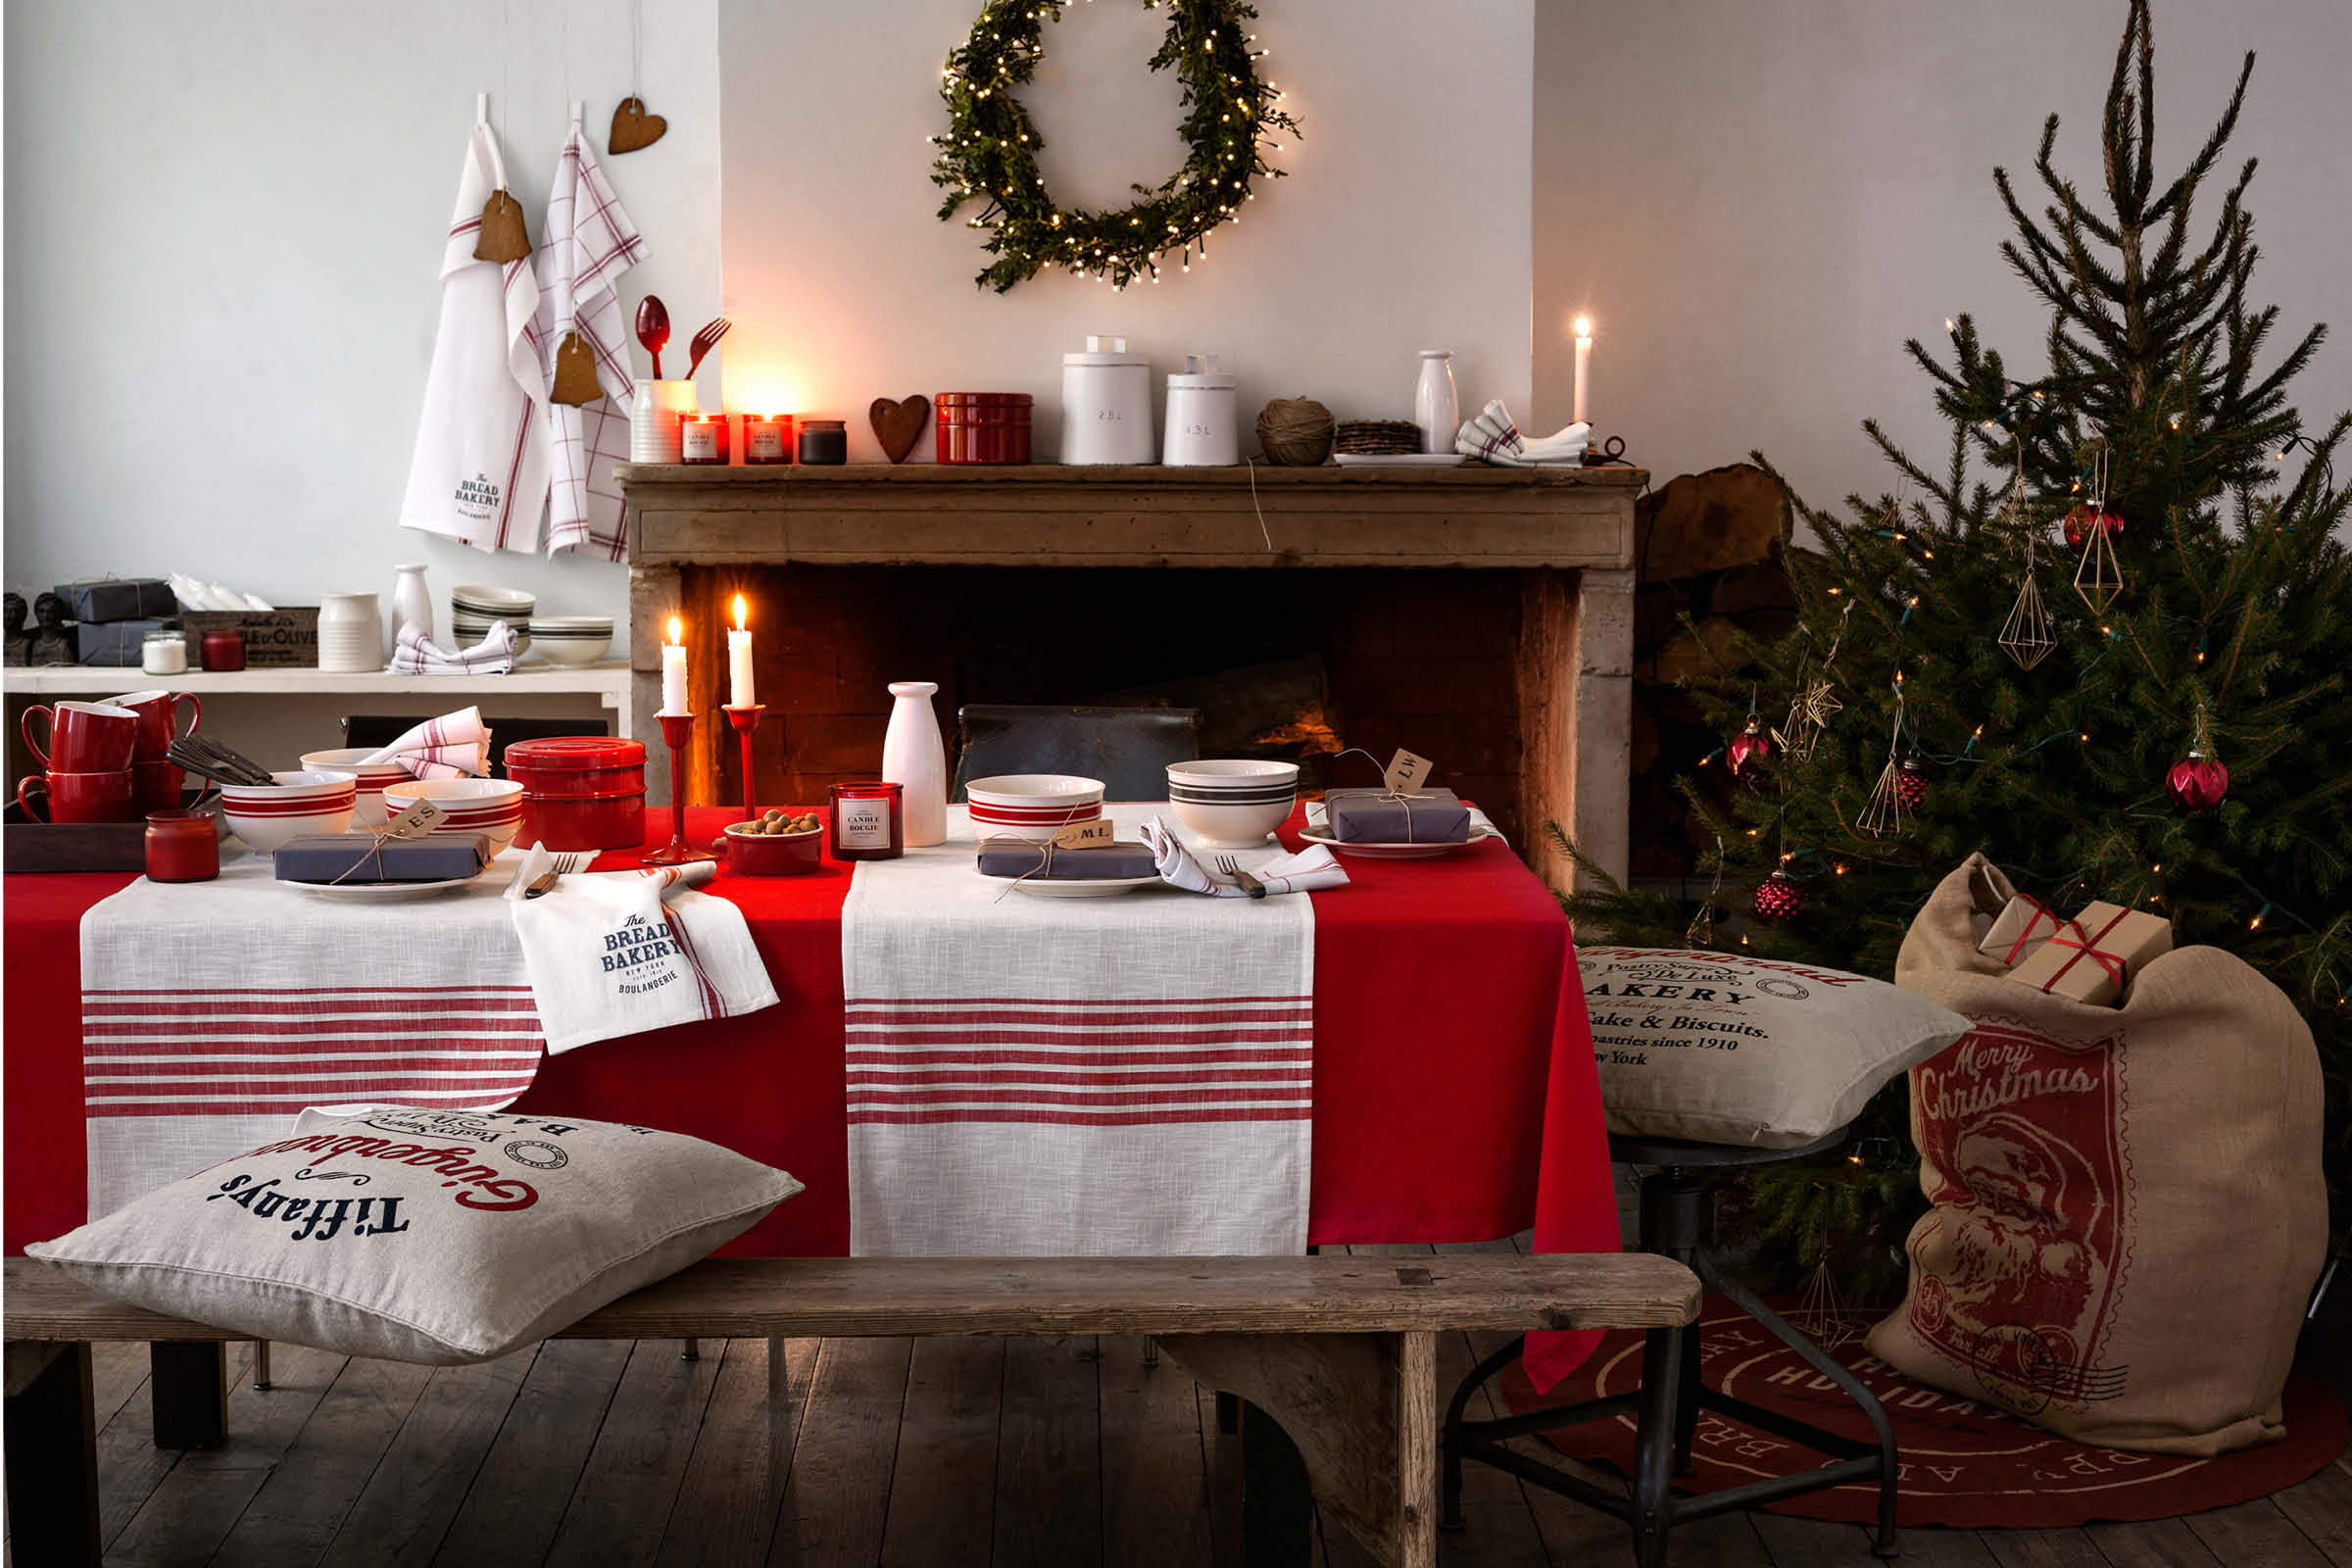 If rustic, Scandi-style Christmas decor is your thing, the latest H&M Home collection is a DREAM